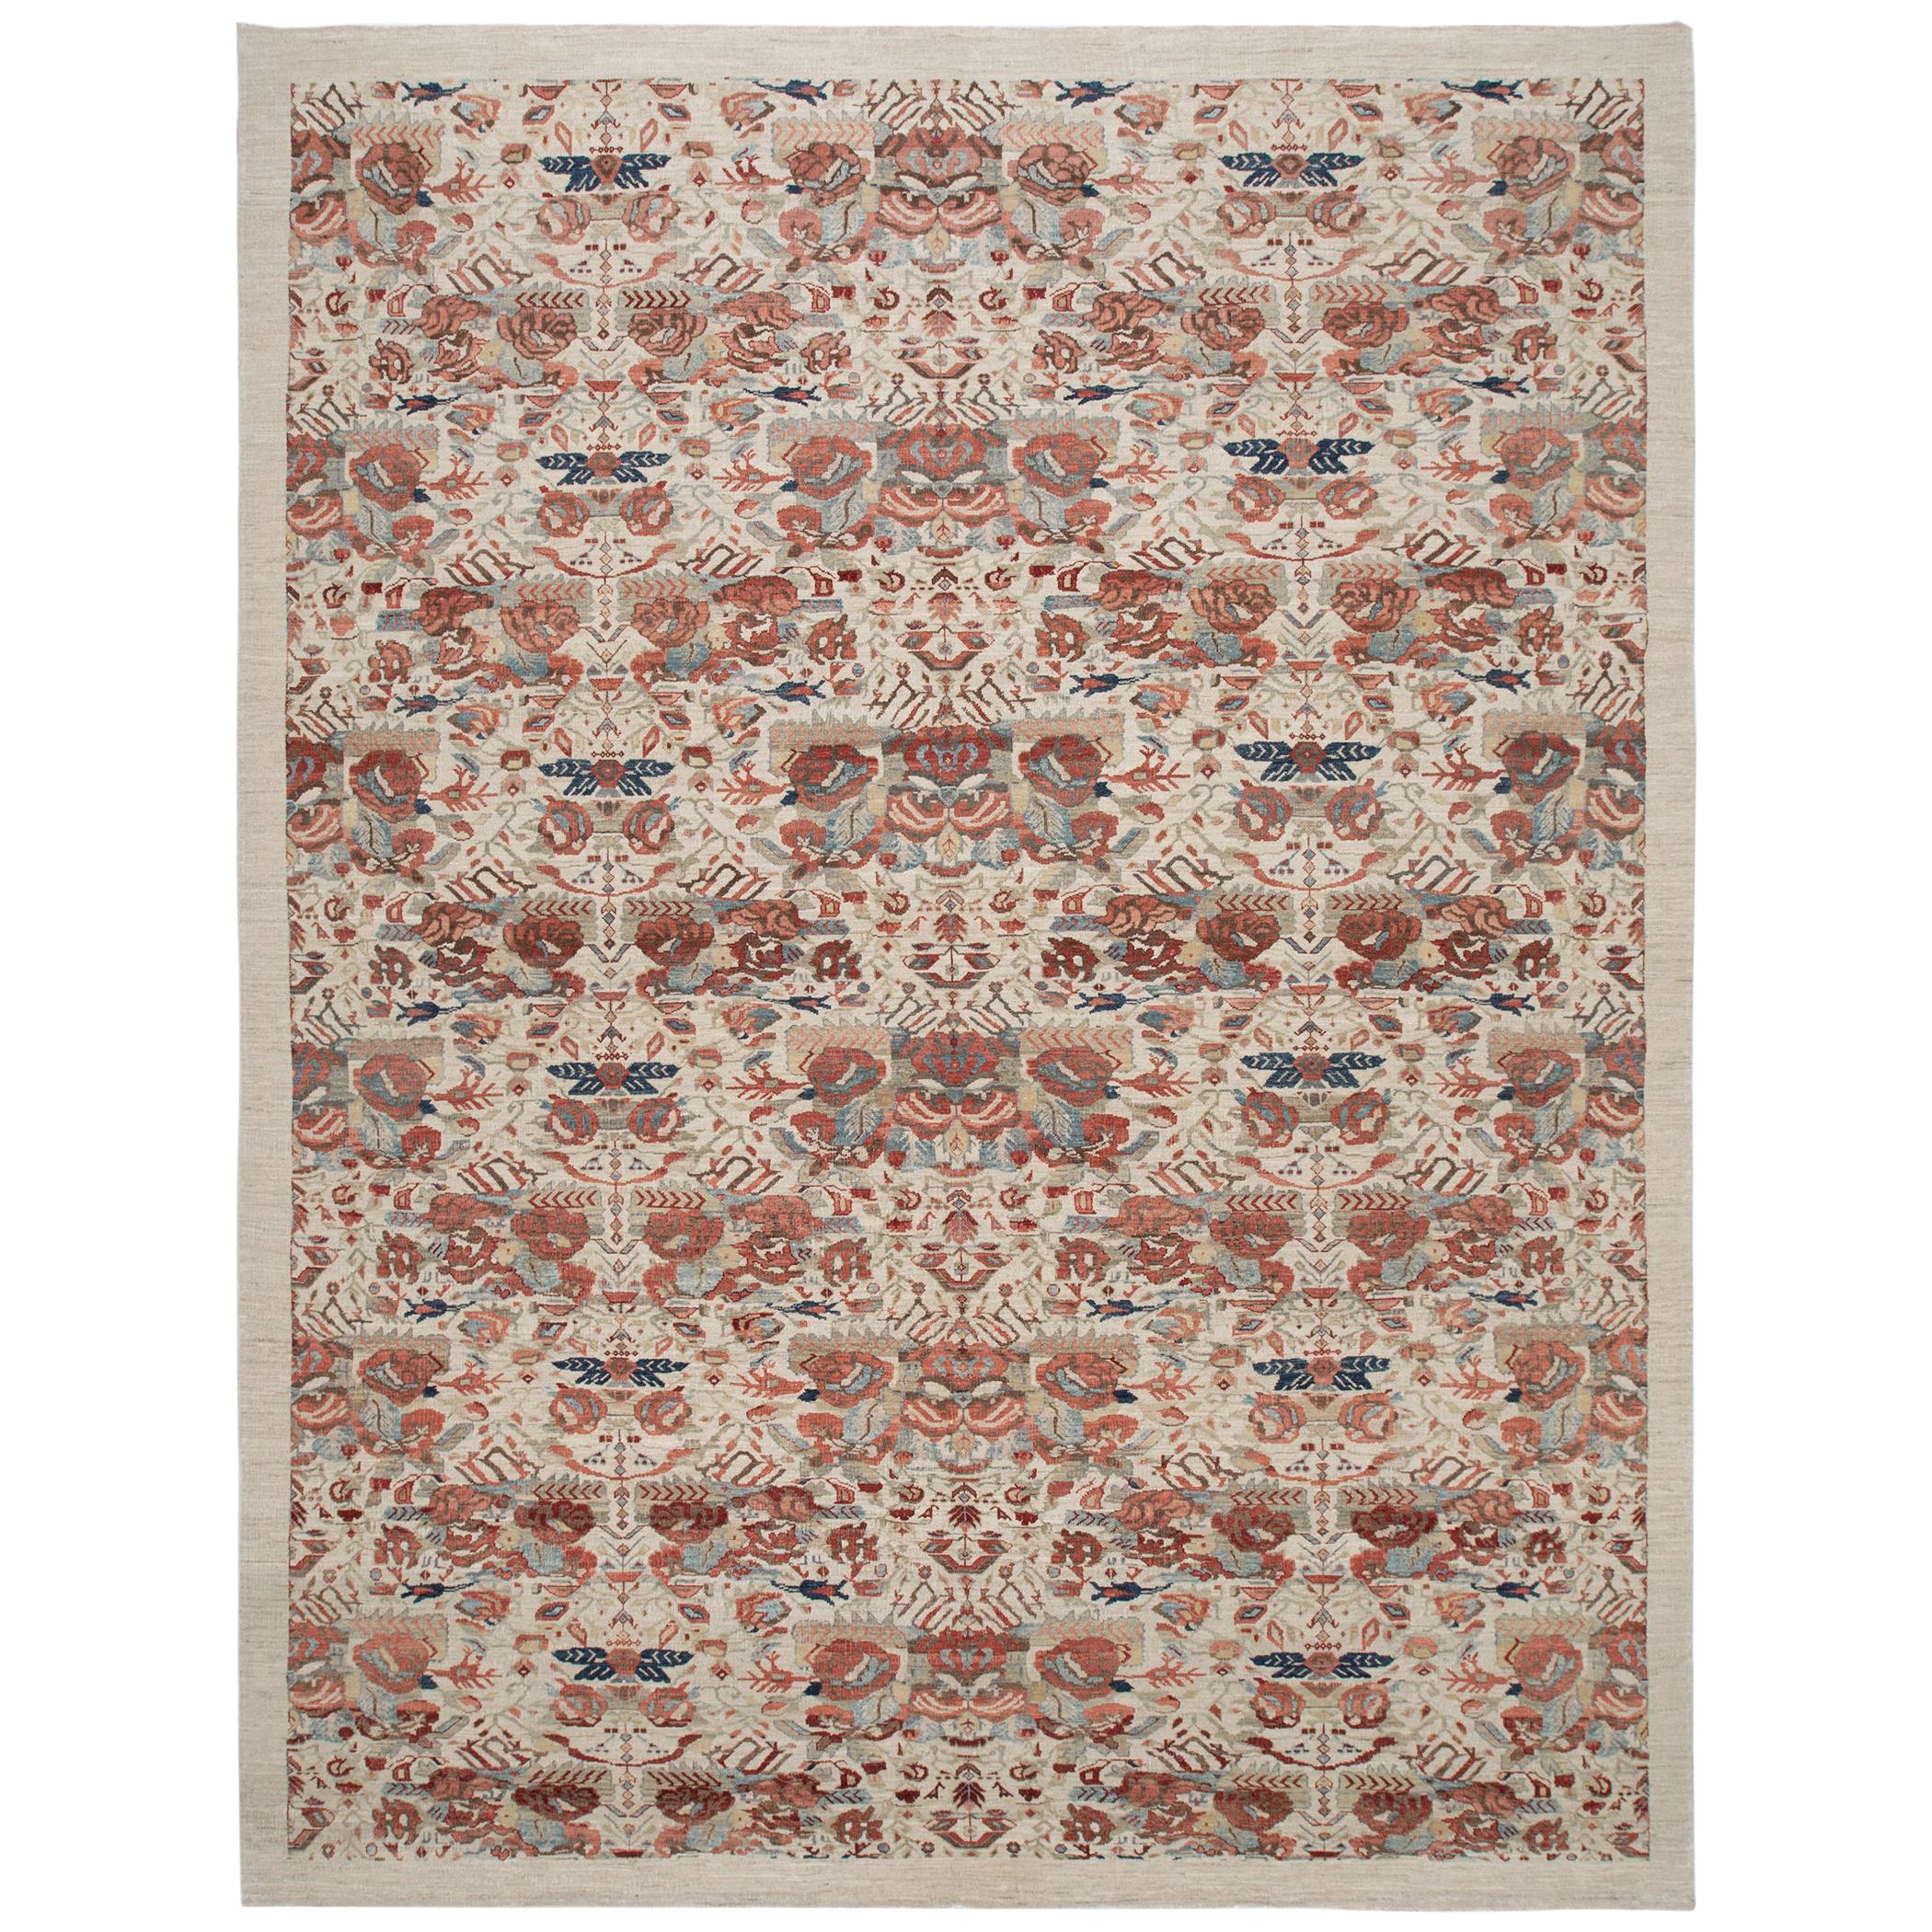 Decorative Hand Knotted Rug in Camel with Blue and Rust Accent